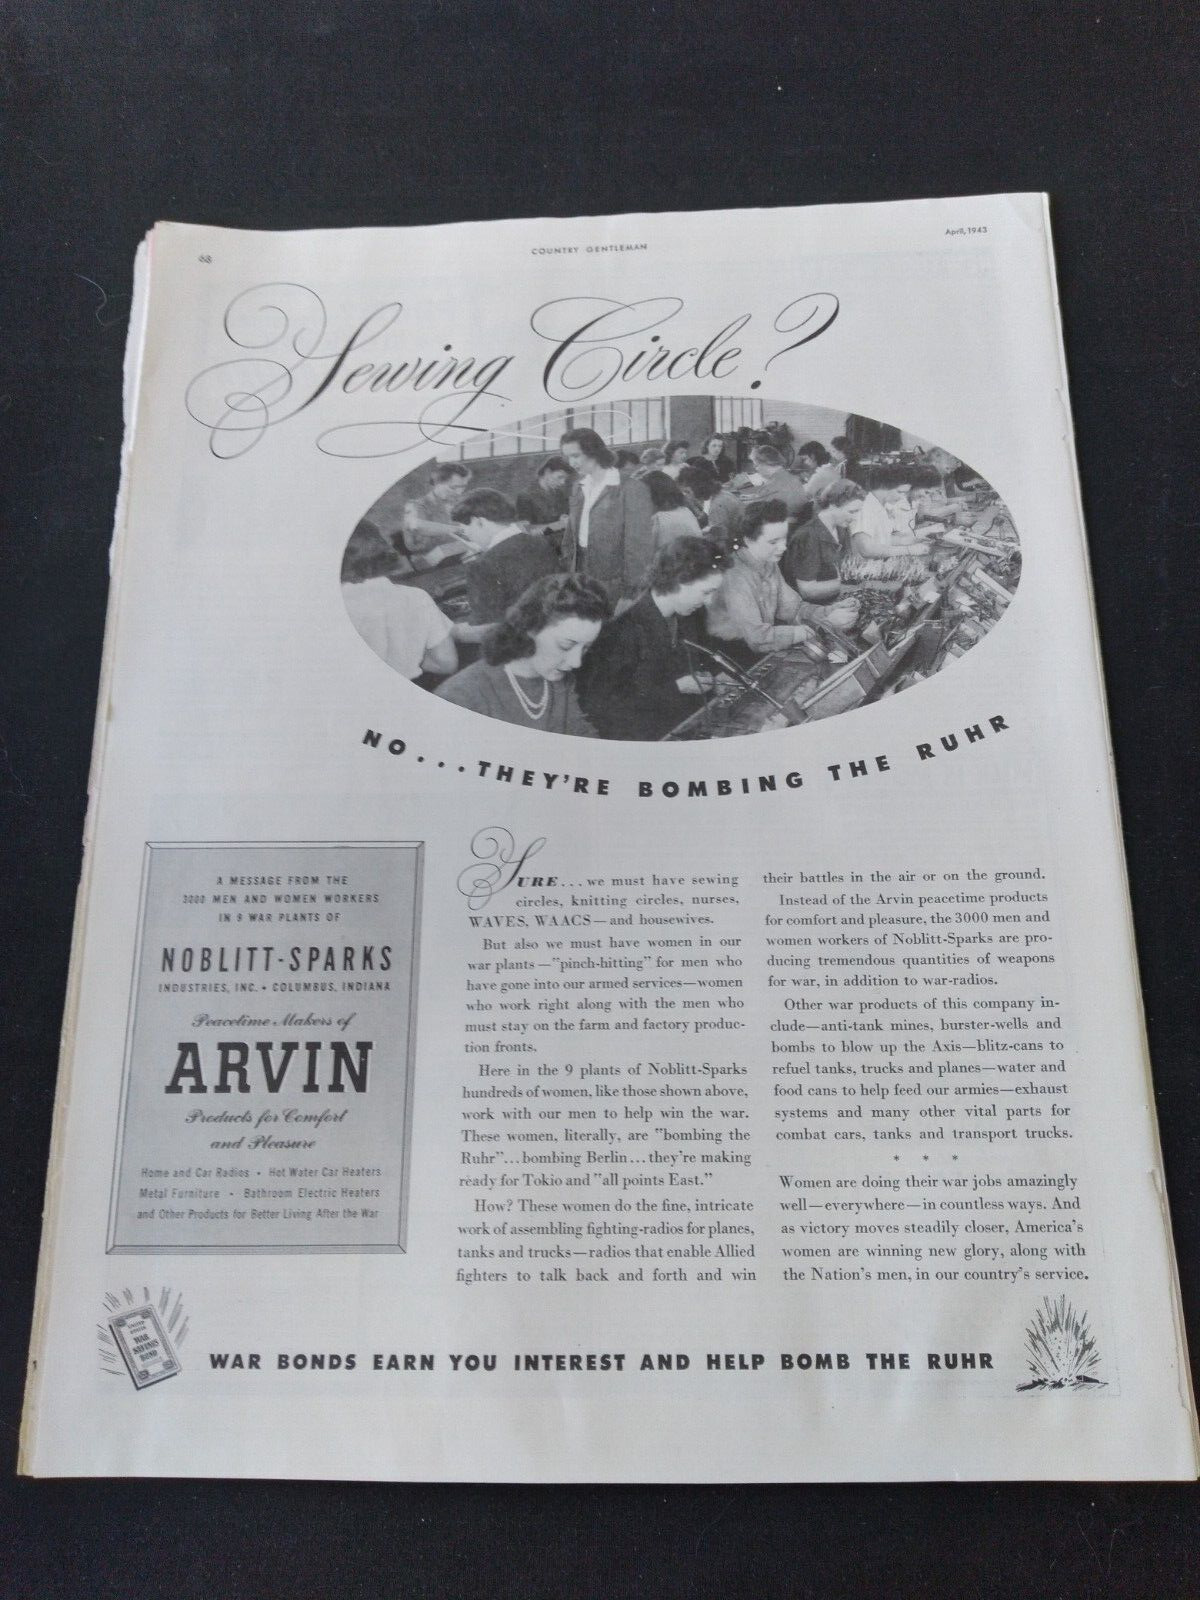 1943 Arvin Products For Comfort And Pleasure Vintage Ad Serving Circle